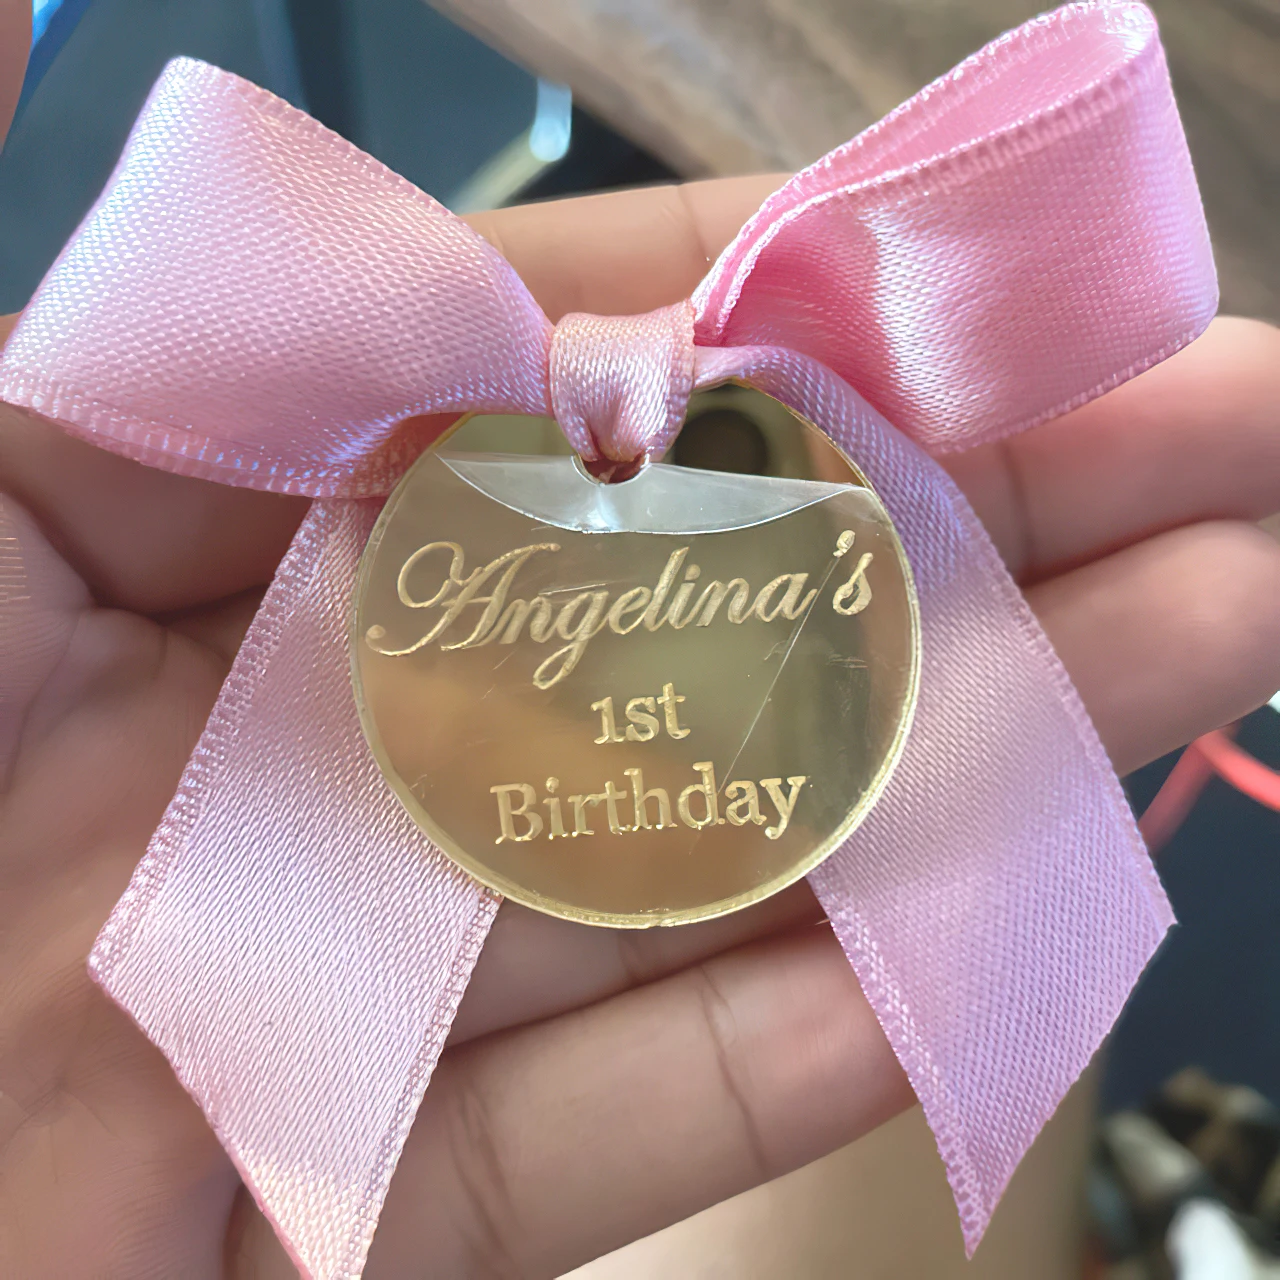 

Gold Acrylic Mirror Tag, Personalized Gift, Save the Date Tag, Wedding Tags, Reception Token, Luxury Tag, Cake Charm(8065)